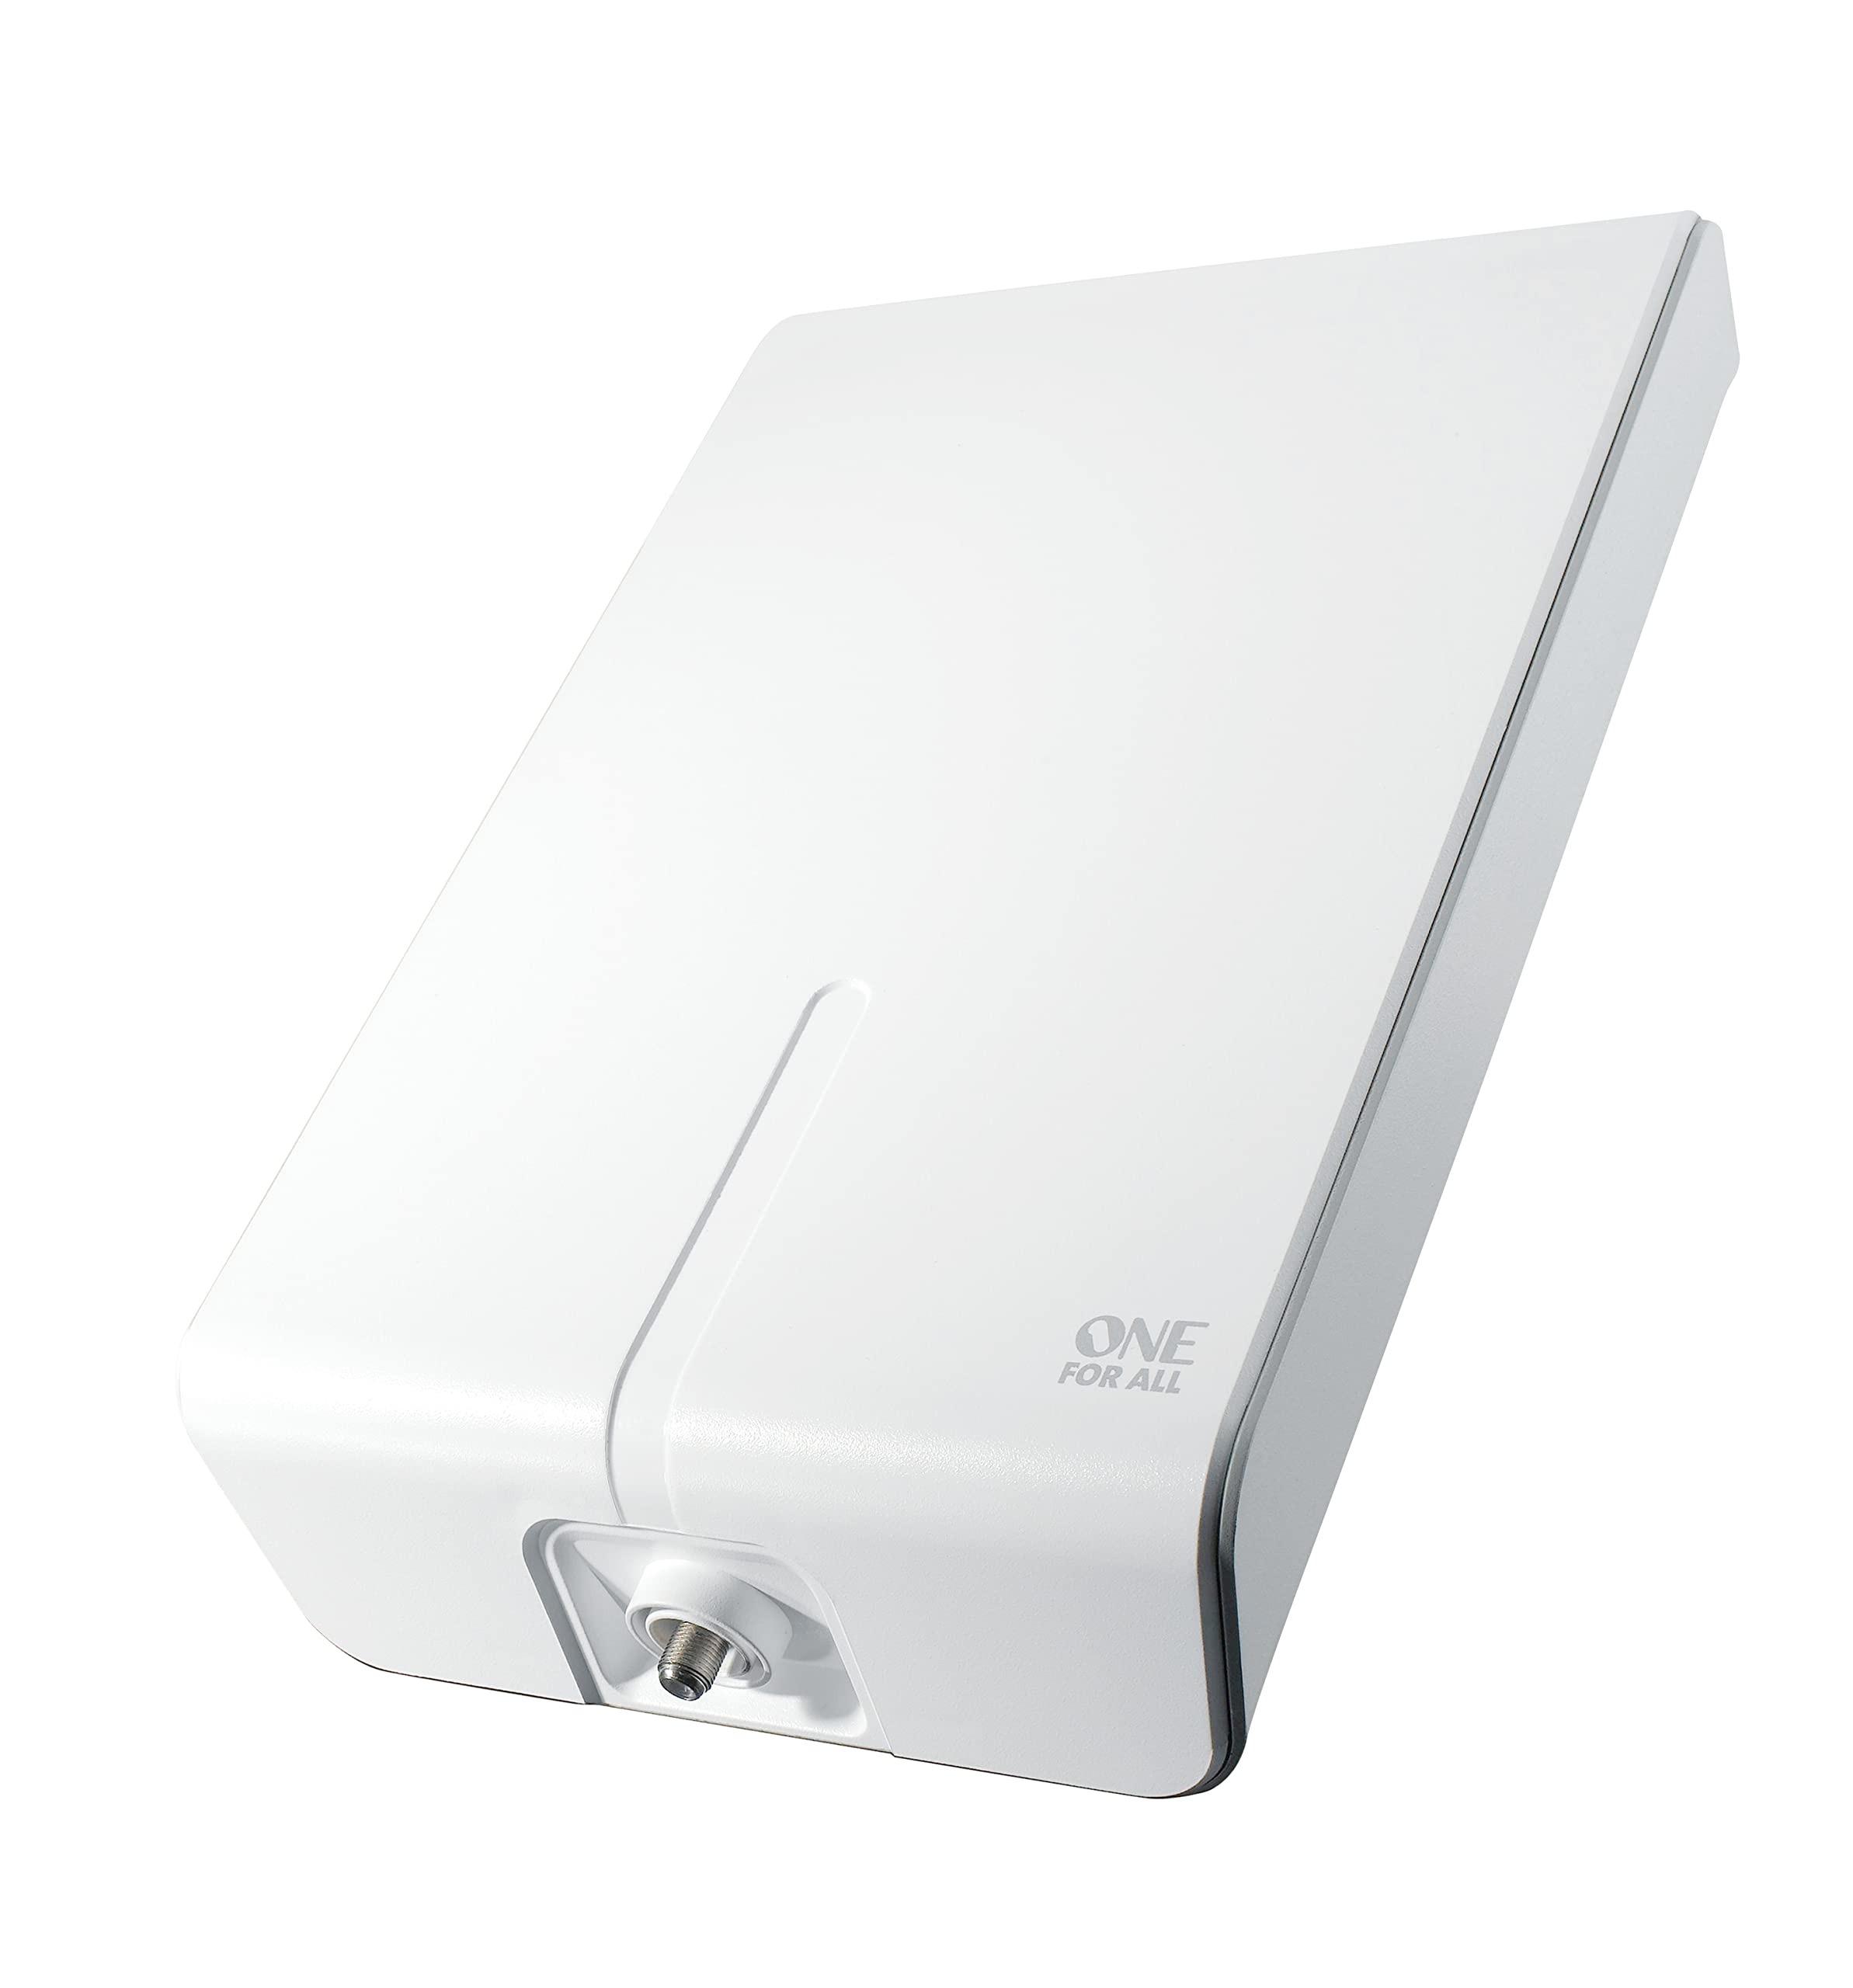 One For All Amplified Attic/Outdoor HDTV Antenna, Model 17411